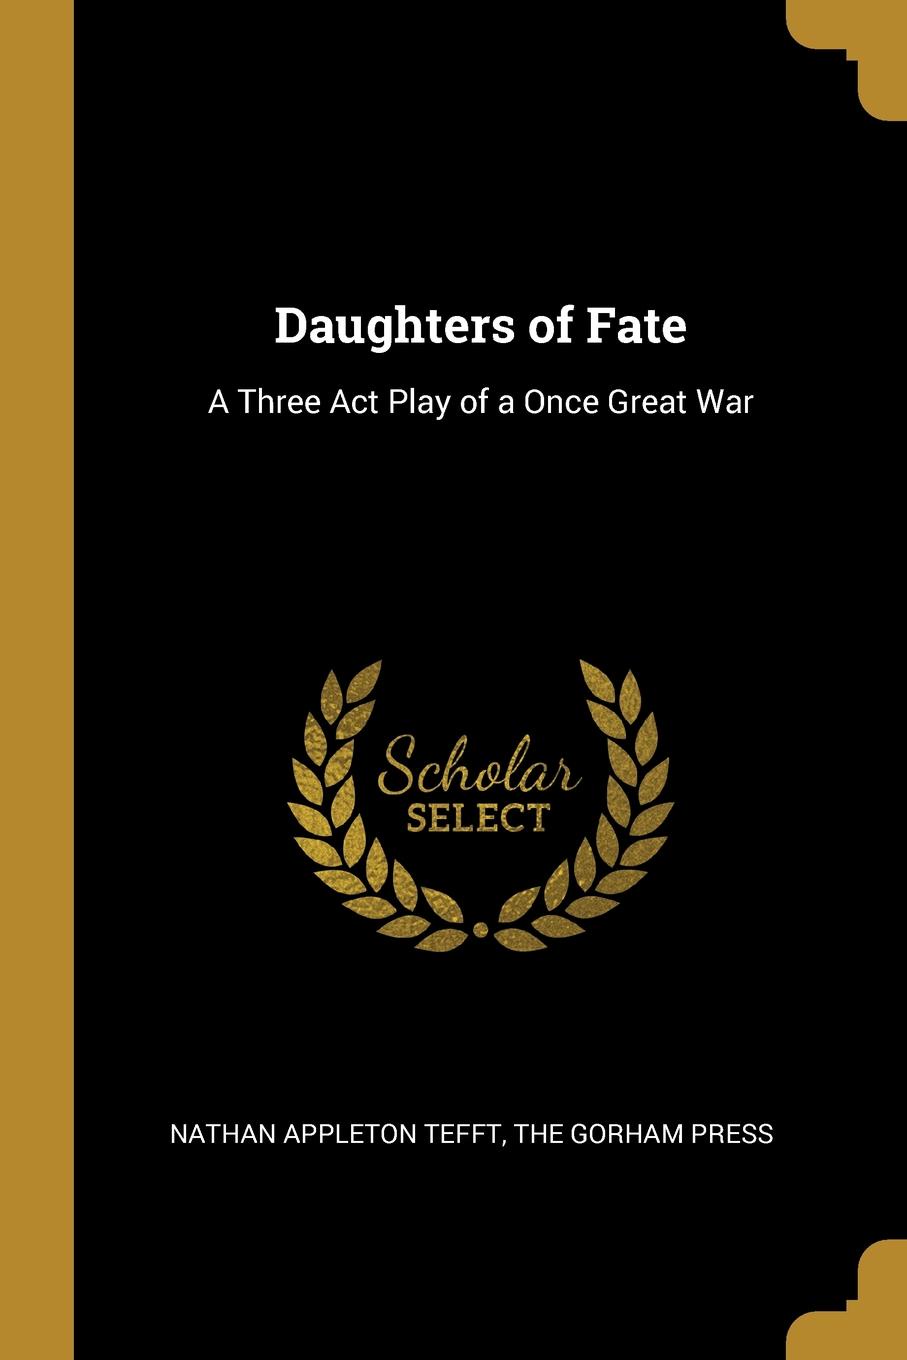 Daughters of Fate. A Three Act Play of a Once Great War